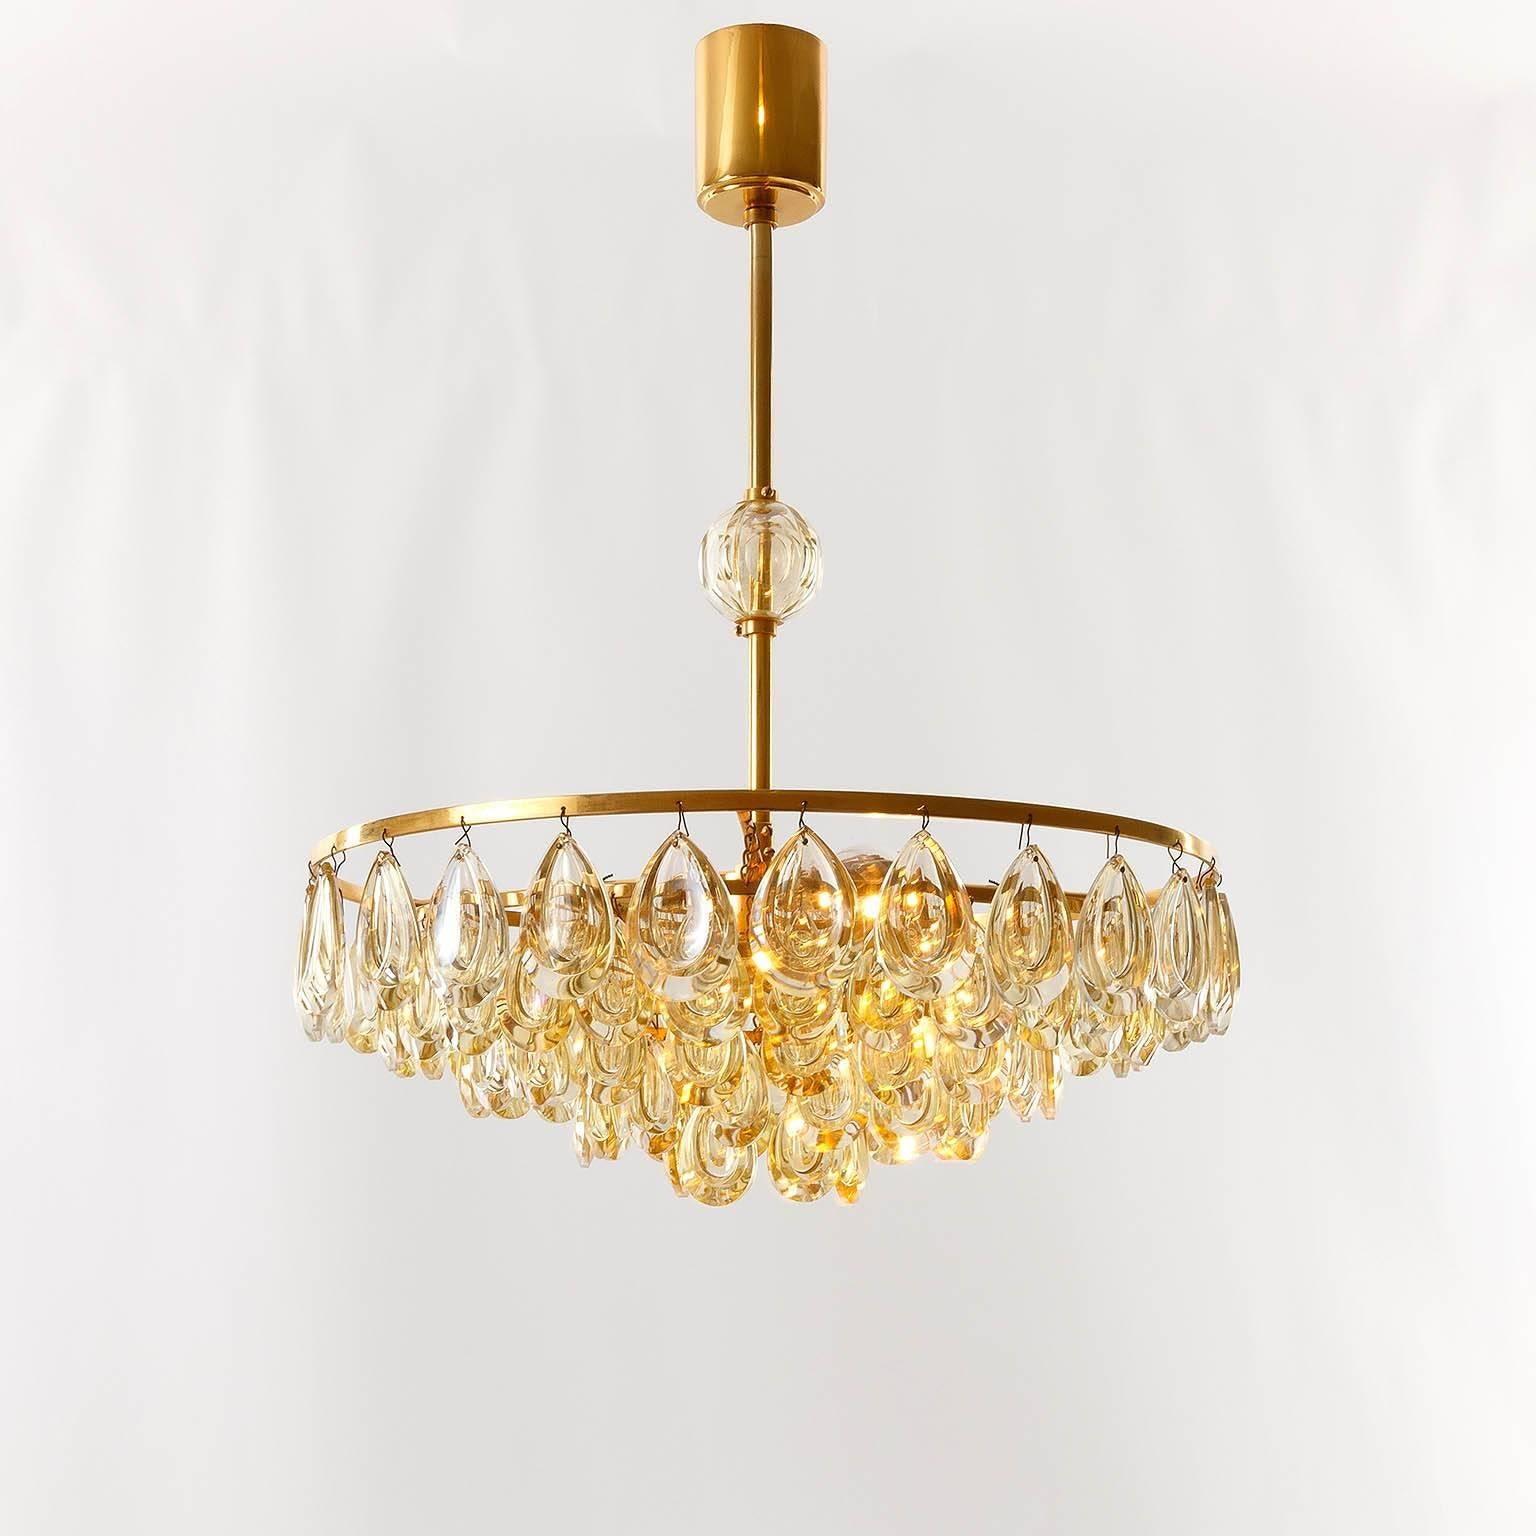 Palwa Chandelier, Gilded Brass and Amber Tone Glass, 1960s For Sale 2